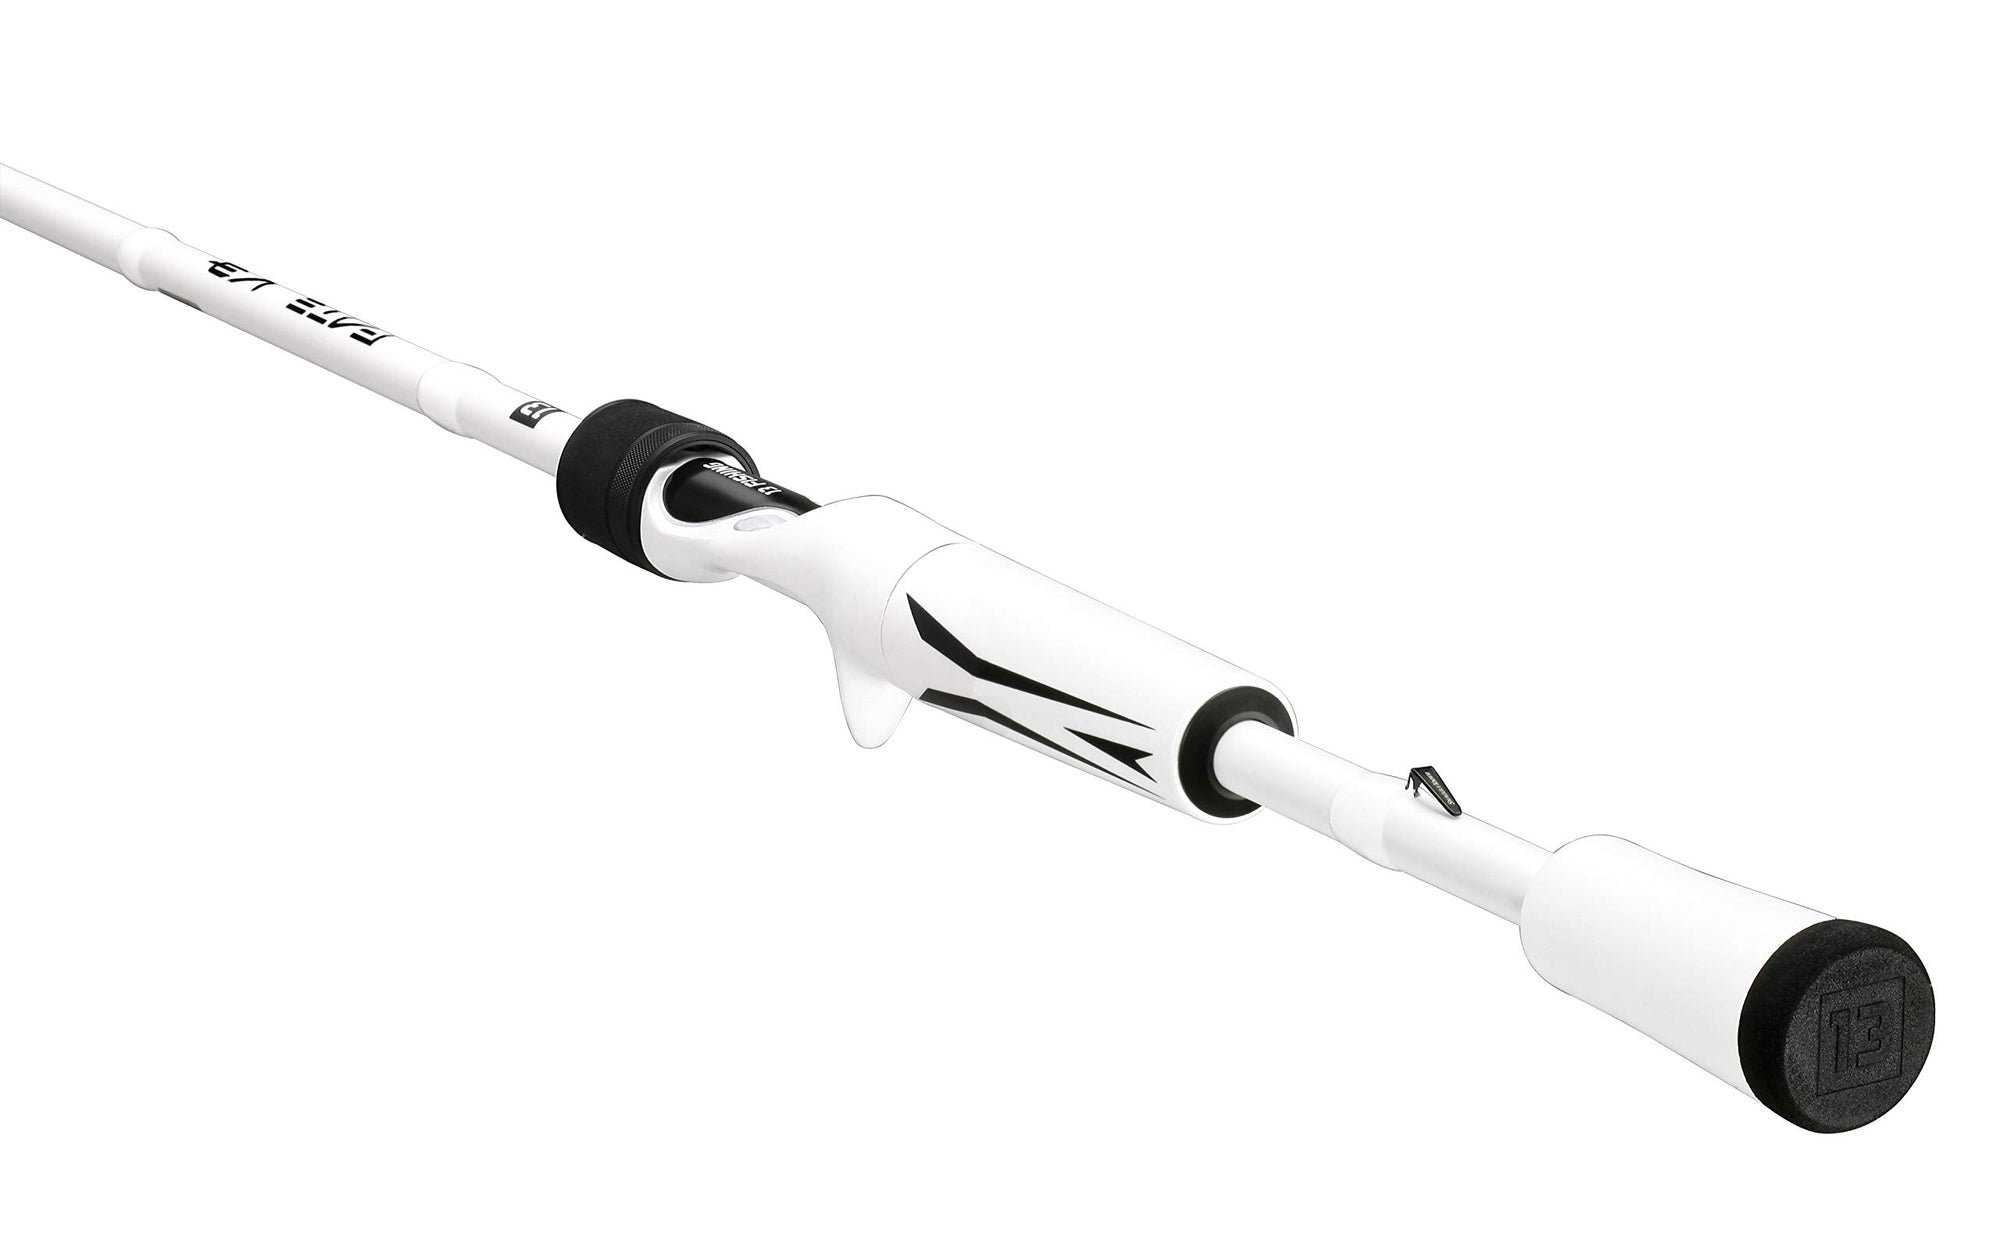 Top-Rated Bait-Cast Fishing Rod  Best Baitcasting Rod for Anglers -  Ocklawaha Outback